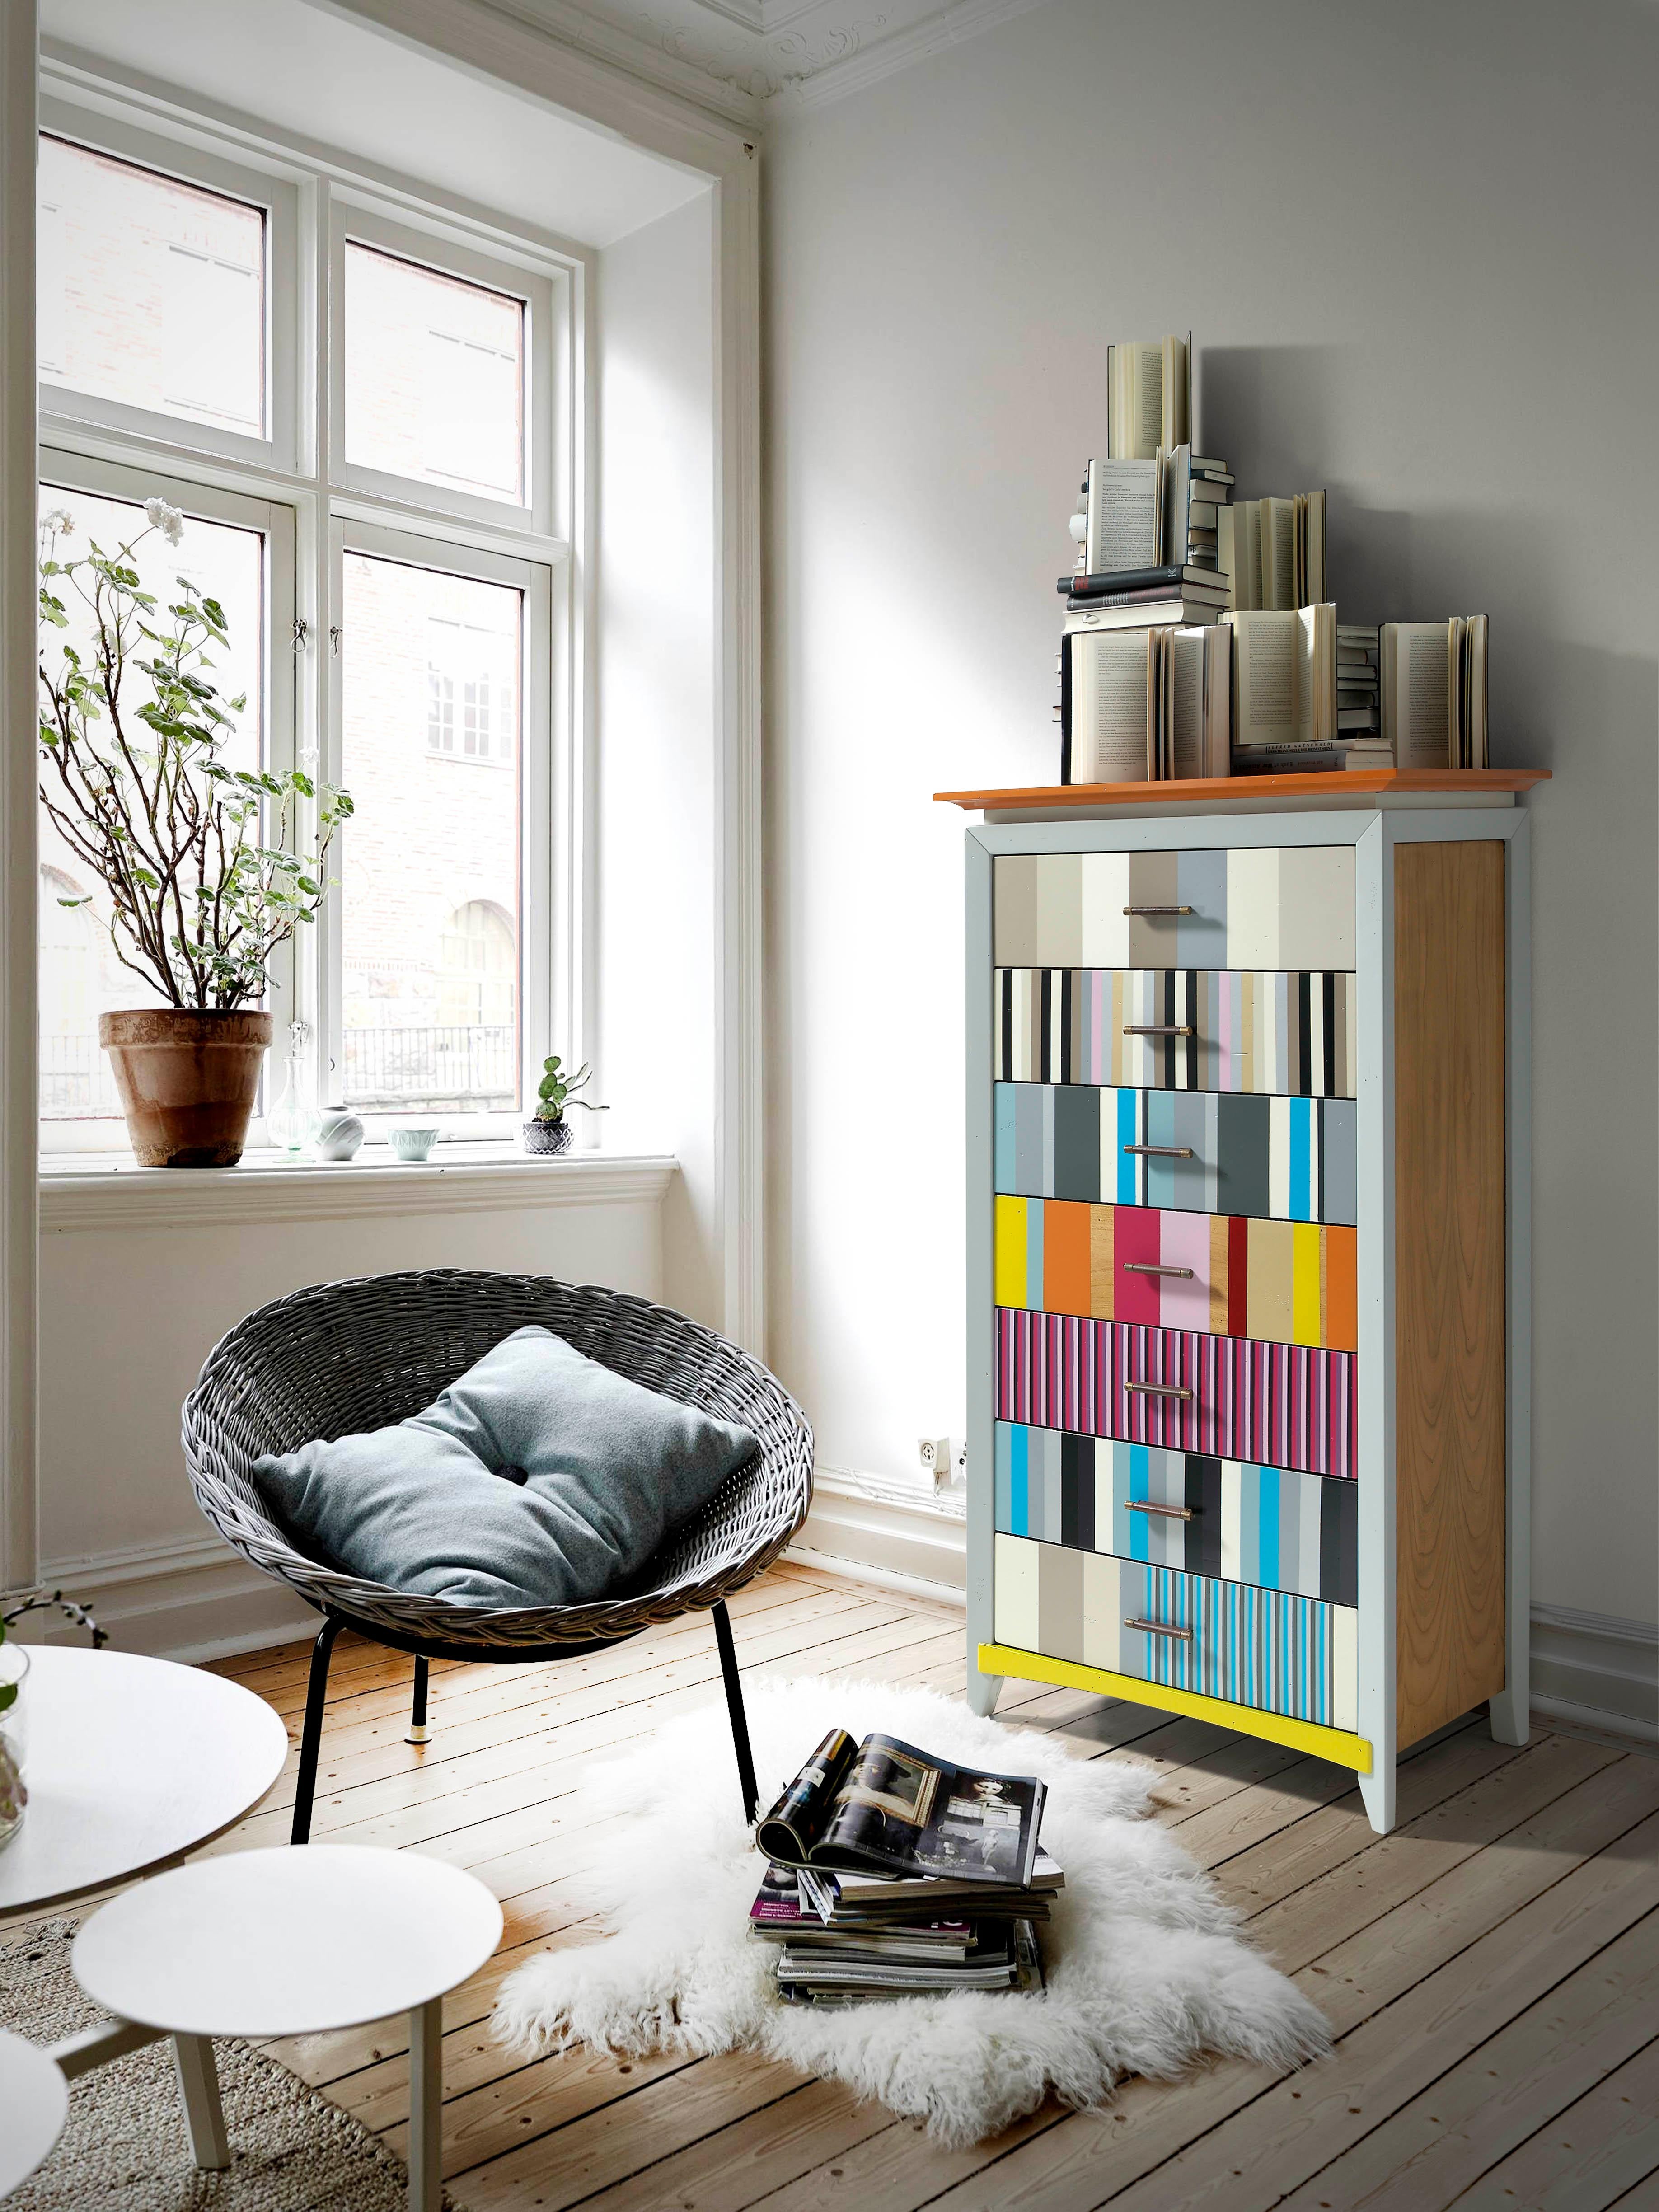 In this chest of drawers, the classic design of the structure gives prominence to the color palette on the front. Its seven drawers have been hand painted in a myriad of tones and colors, in a striped pattern that plays with the thickness of the